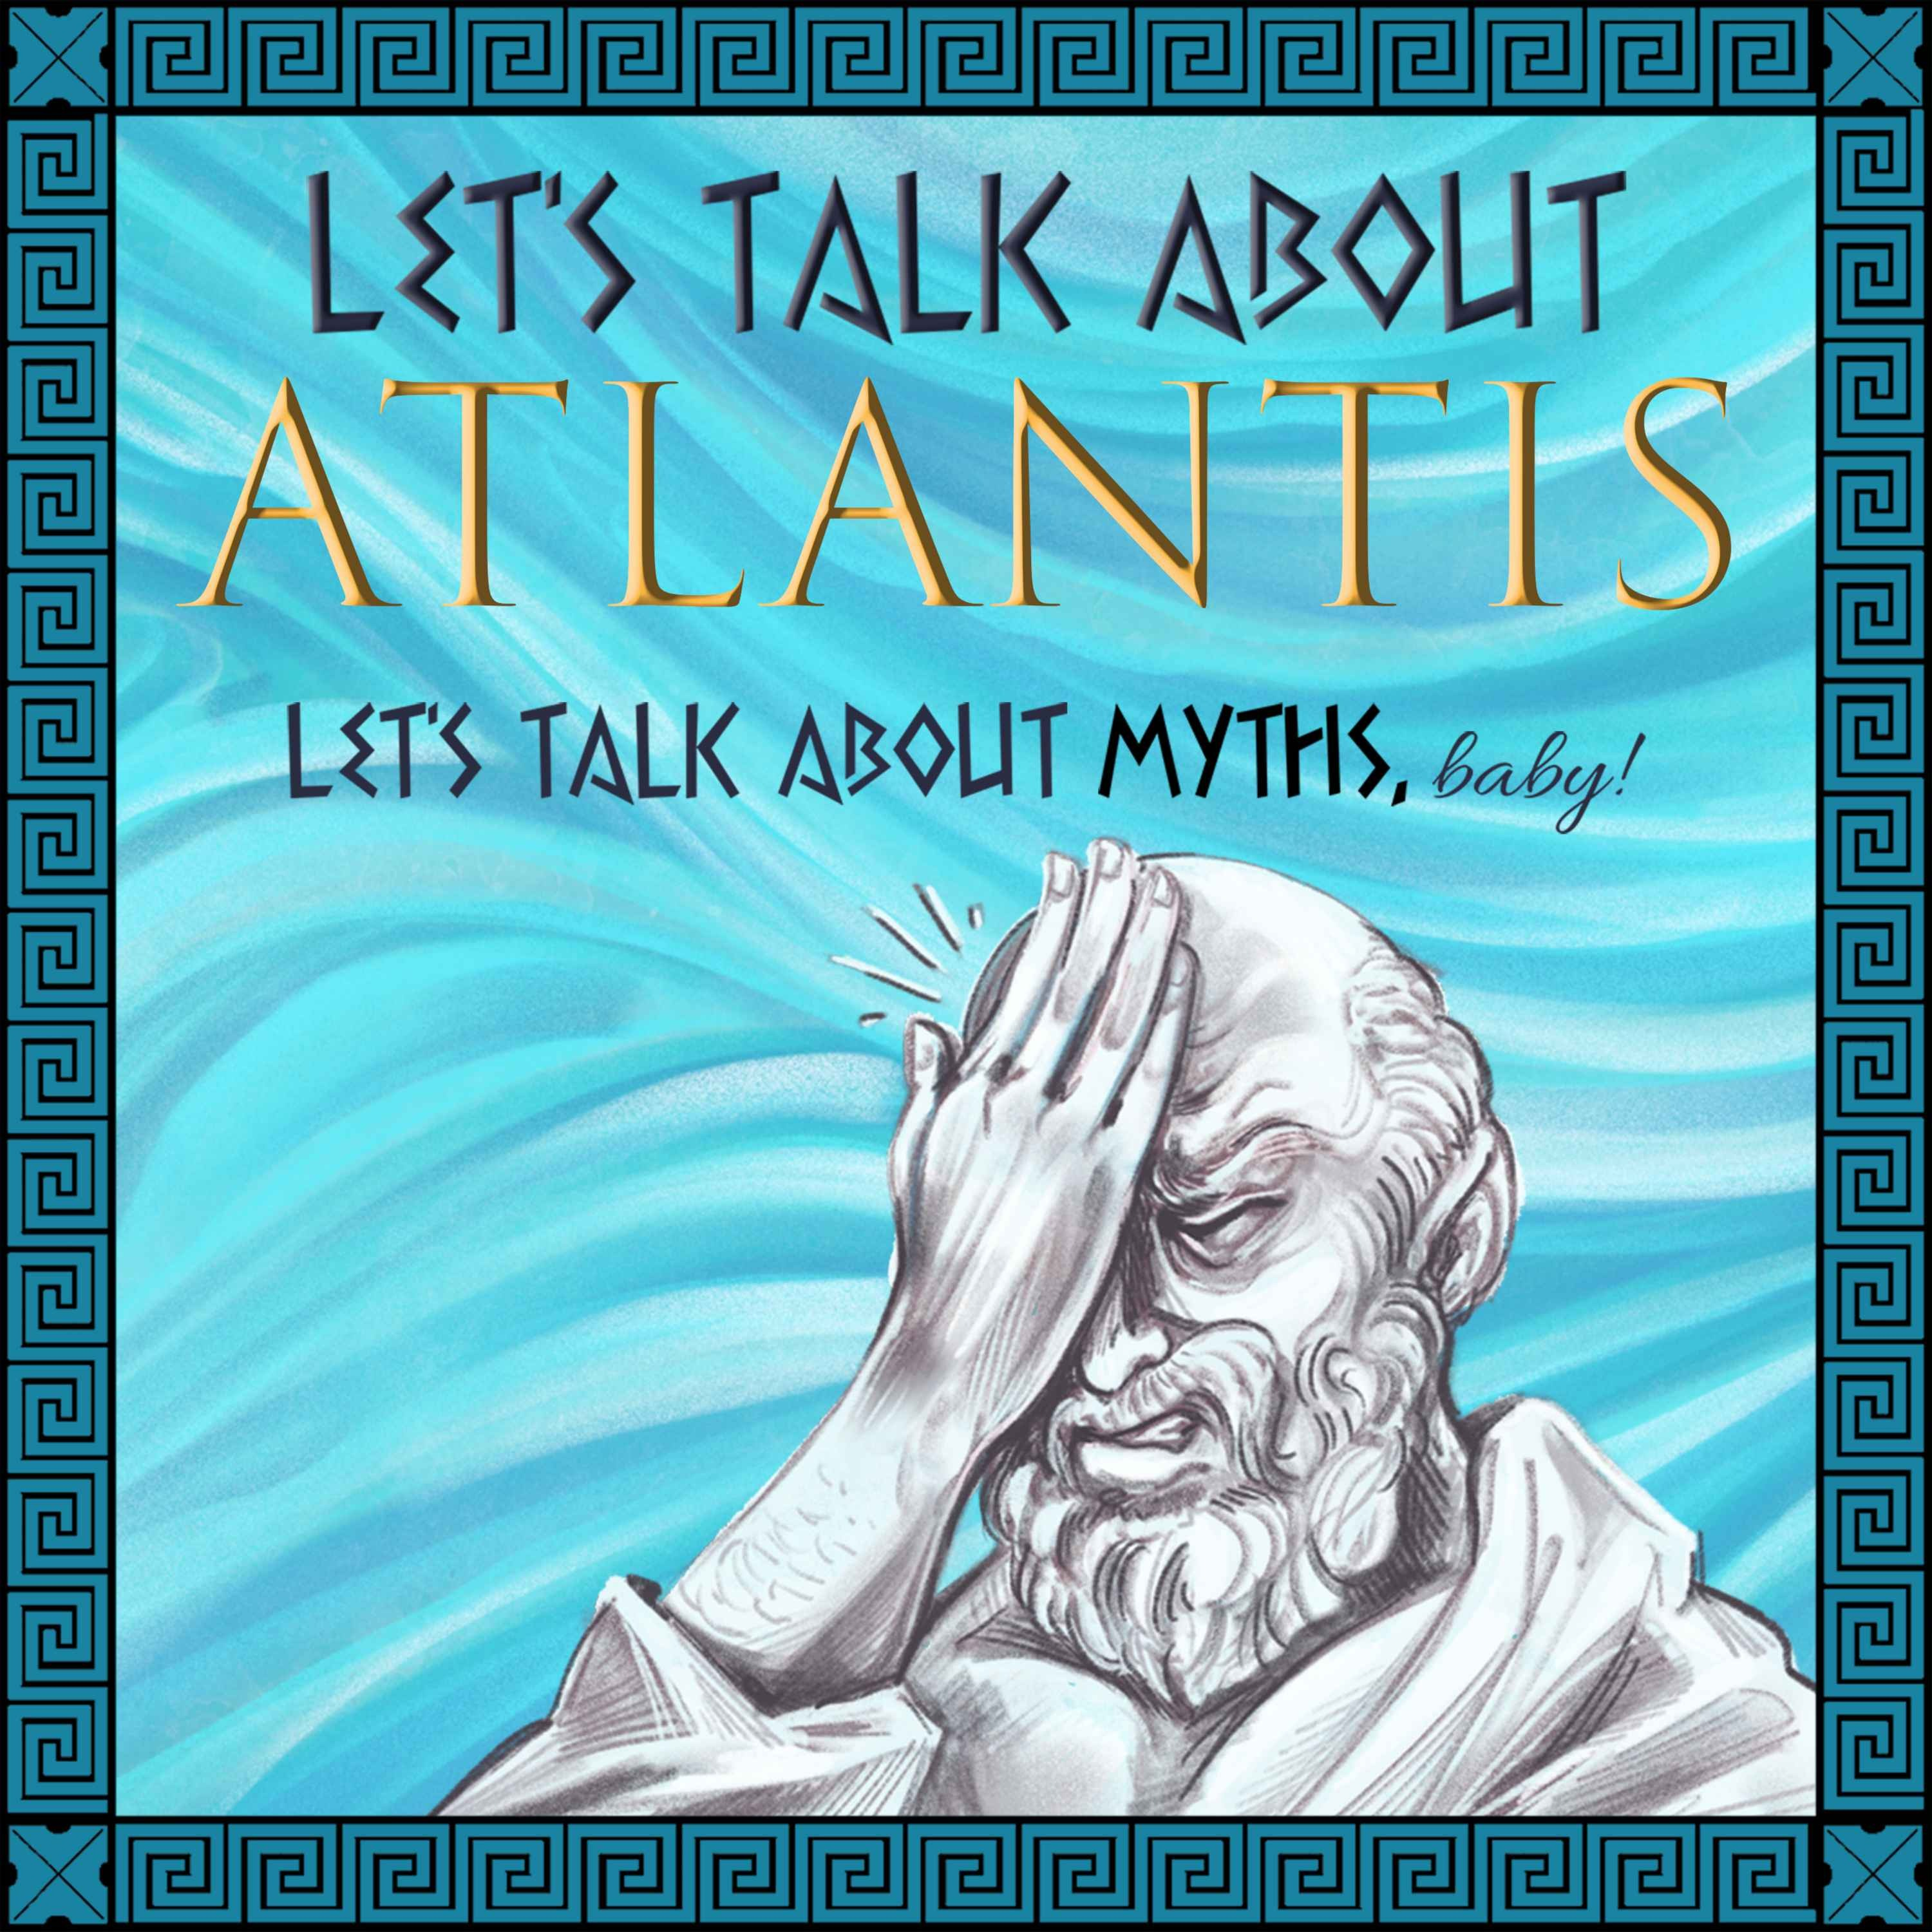 Lost Ancient City or Philosophical Allegory? Deconstructing Atlantis